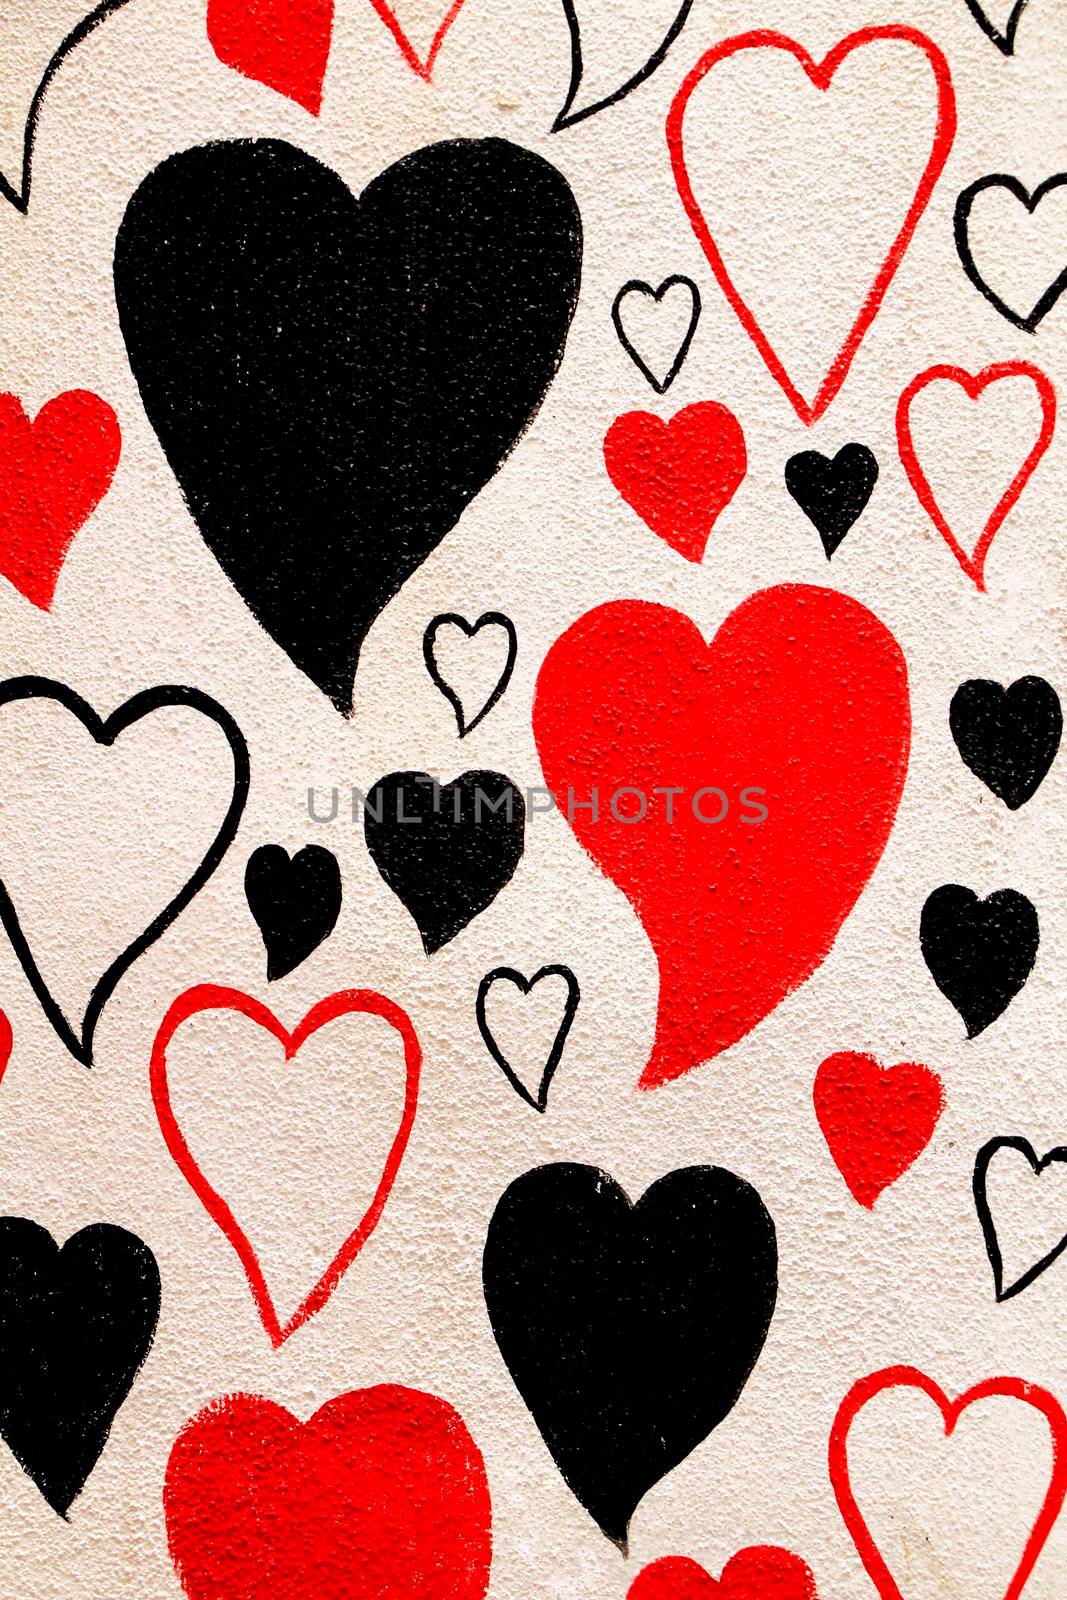 Black, white and red hearts painted on white wall in Spain